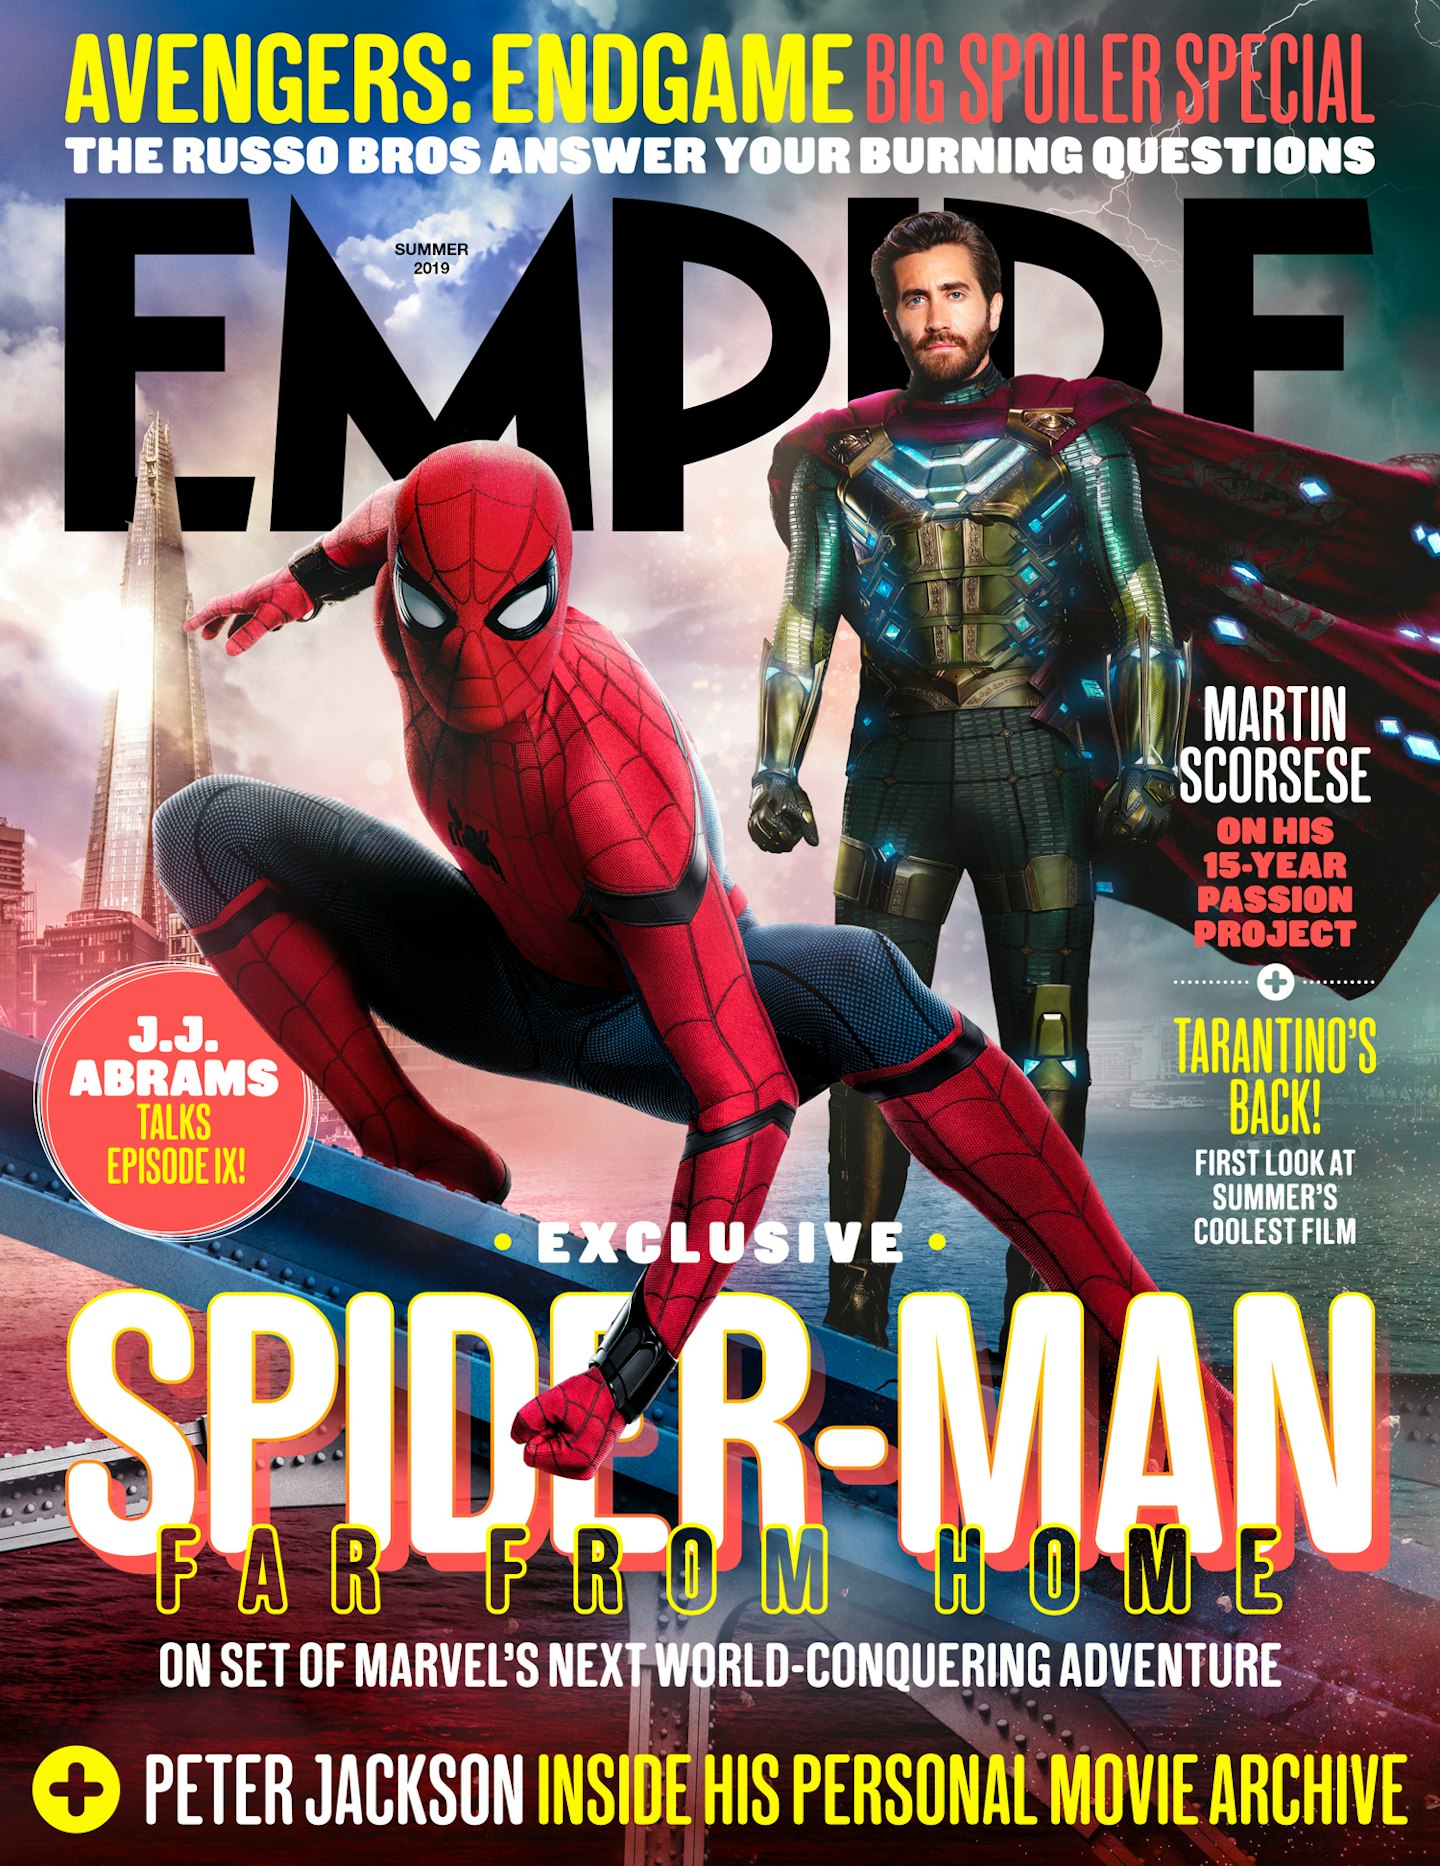 Empire's Exclusive Spider-Man: Homecoming Cover Revealed, Movies